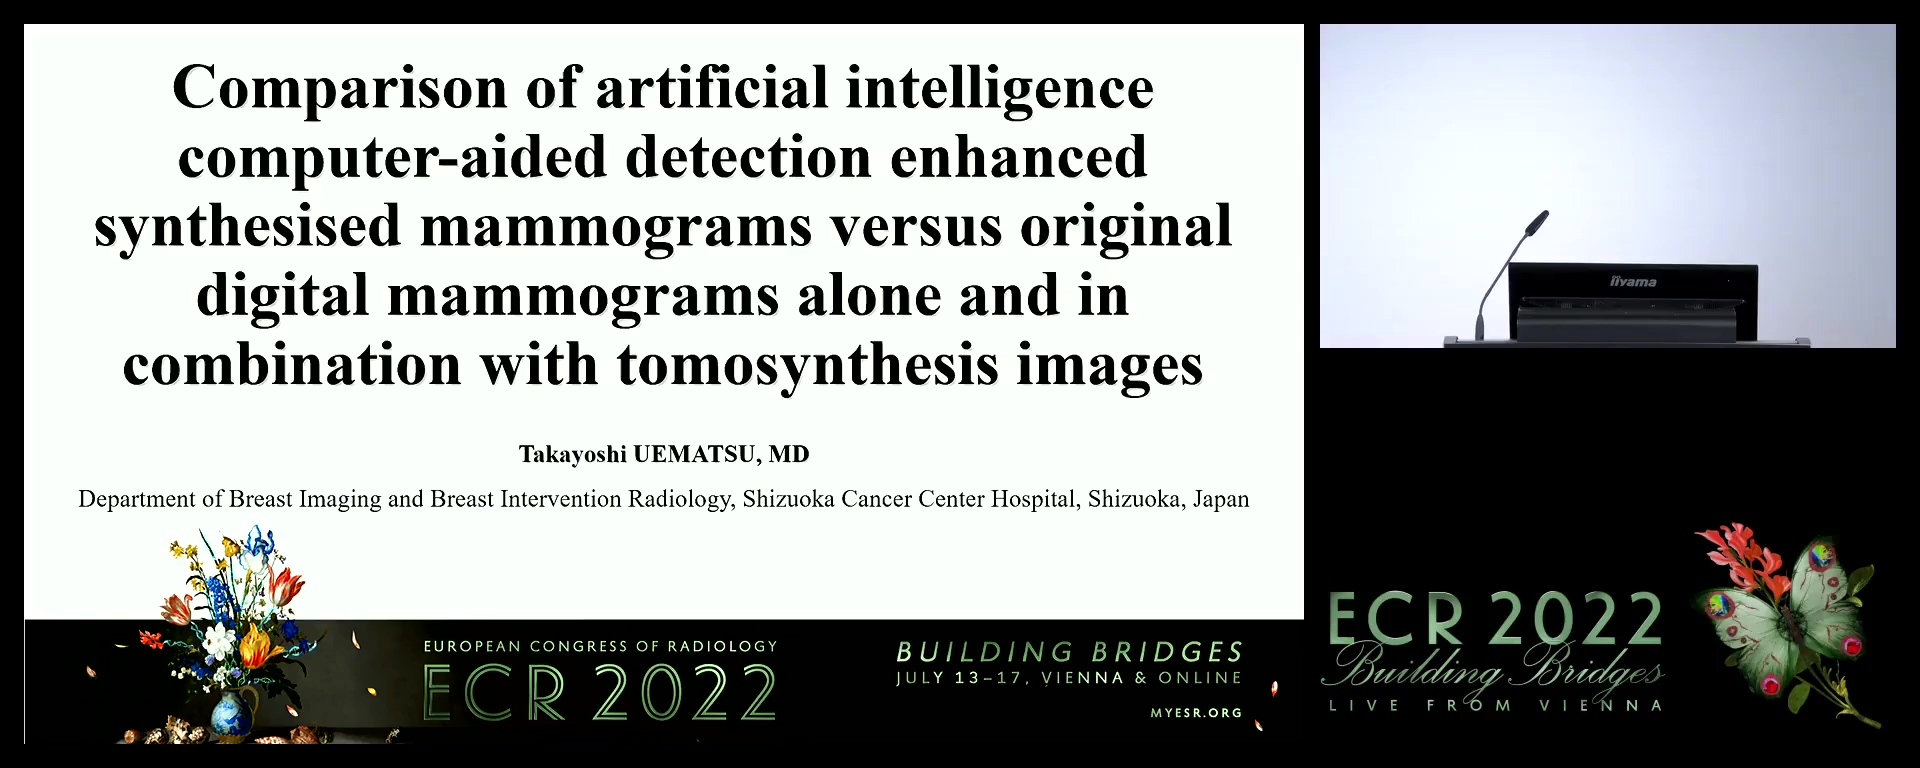 Comparison of artificial intelligence computer-aided detection enhanced synthesised mammograms versus original digital mammograms alone and in combination with tomosynthesis images